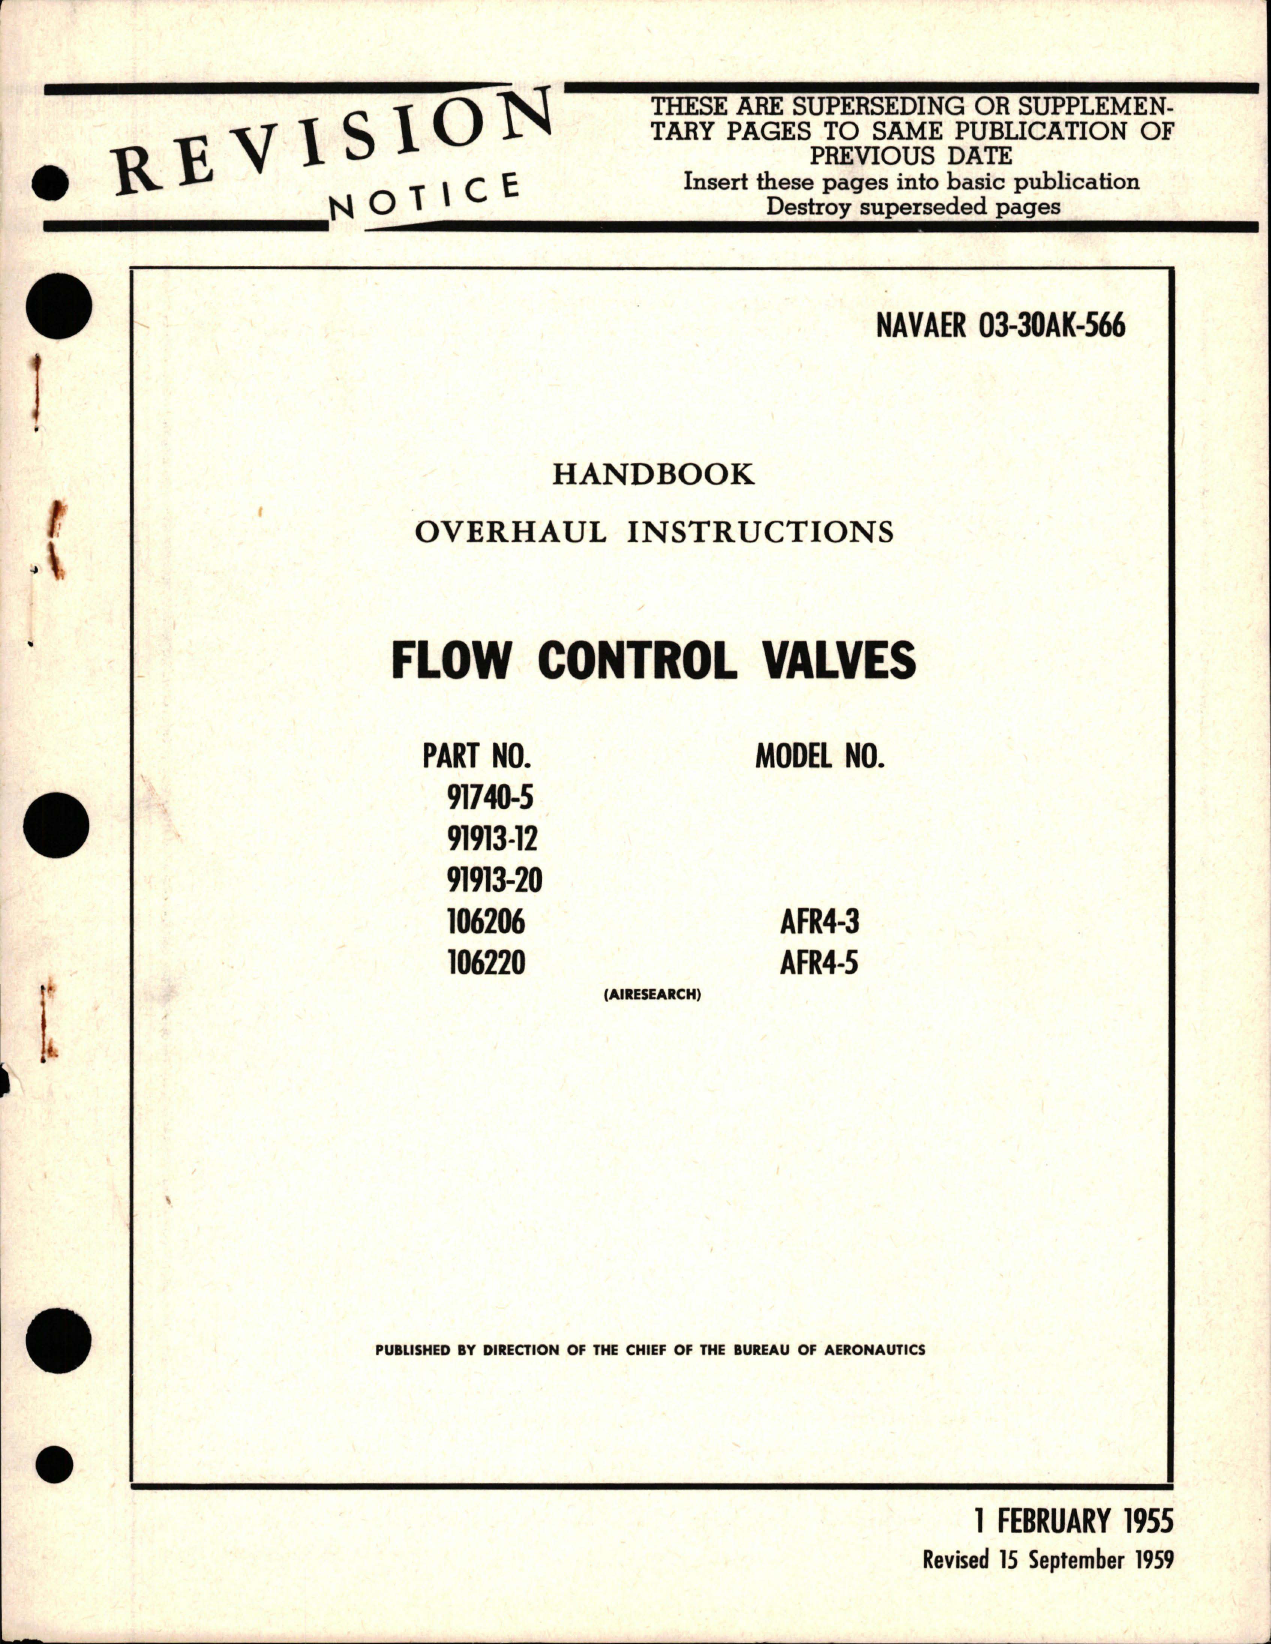 Sample page 1 from AirCorps Library document: Overhaul Instructions for Flow Control Valves - Models AFR4-3 and AFR4-5